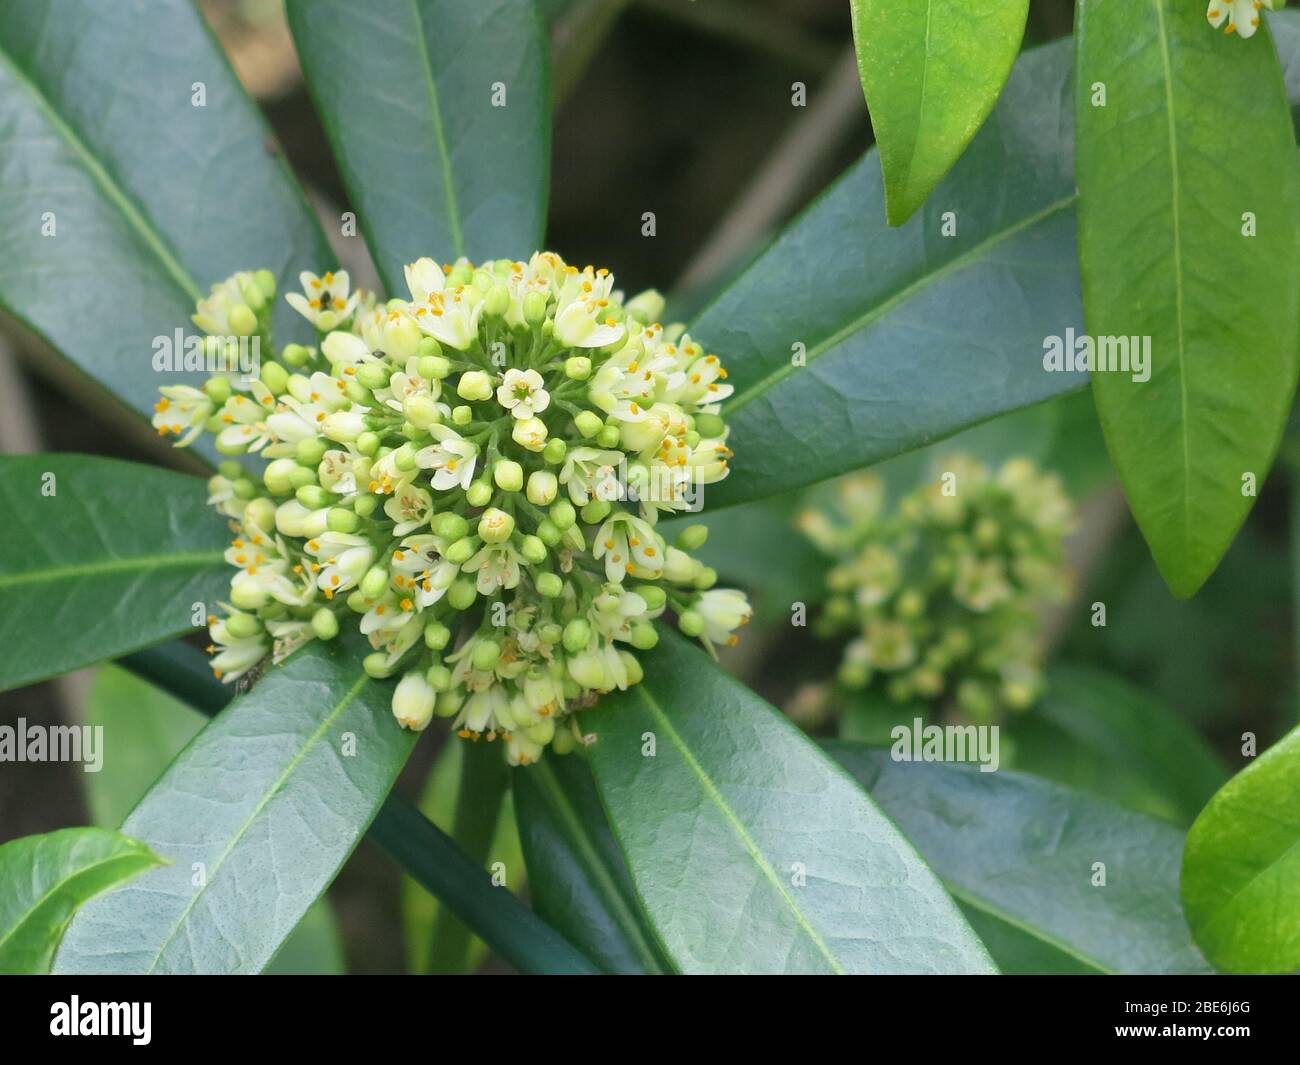 Close-up of the flower head of a creamy yellow Skimmia confusa: Kew Green, with the six fleshy leaves around it, a low maintenance shrub for spring. Stock Photo